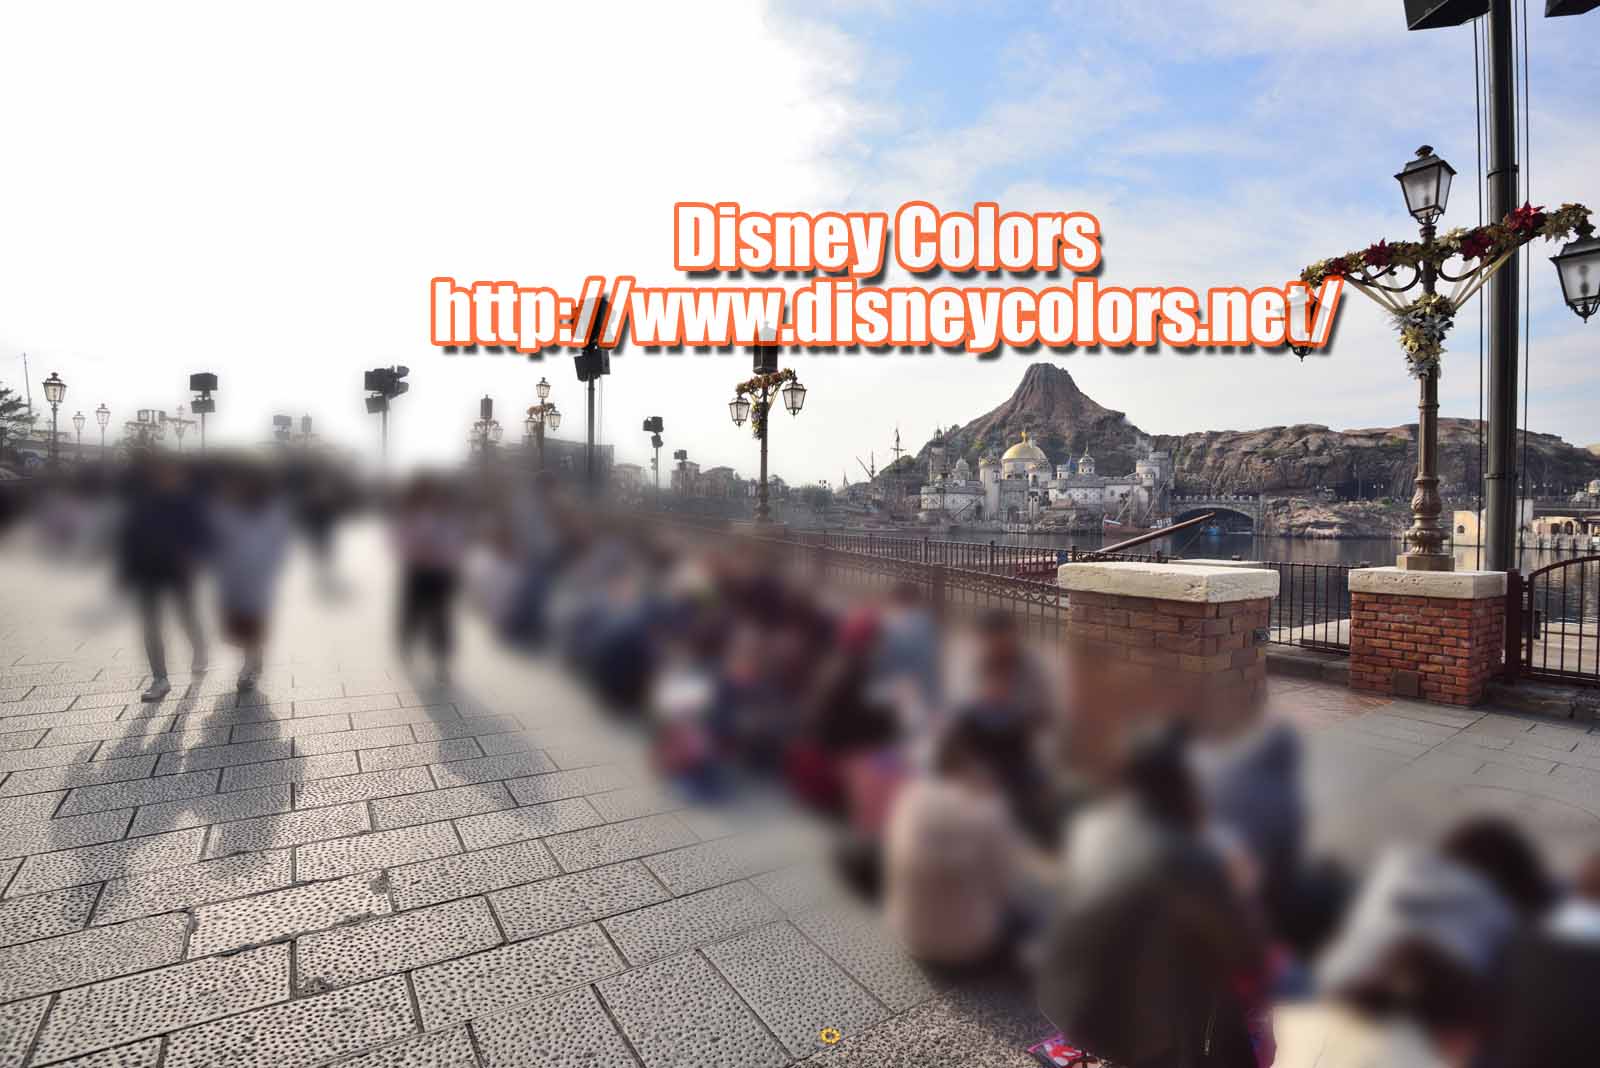 Tds イッツ クリスマスタイム 18 鑑賞ガイド Disney Colors Event Guide